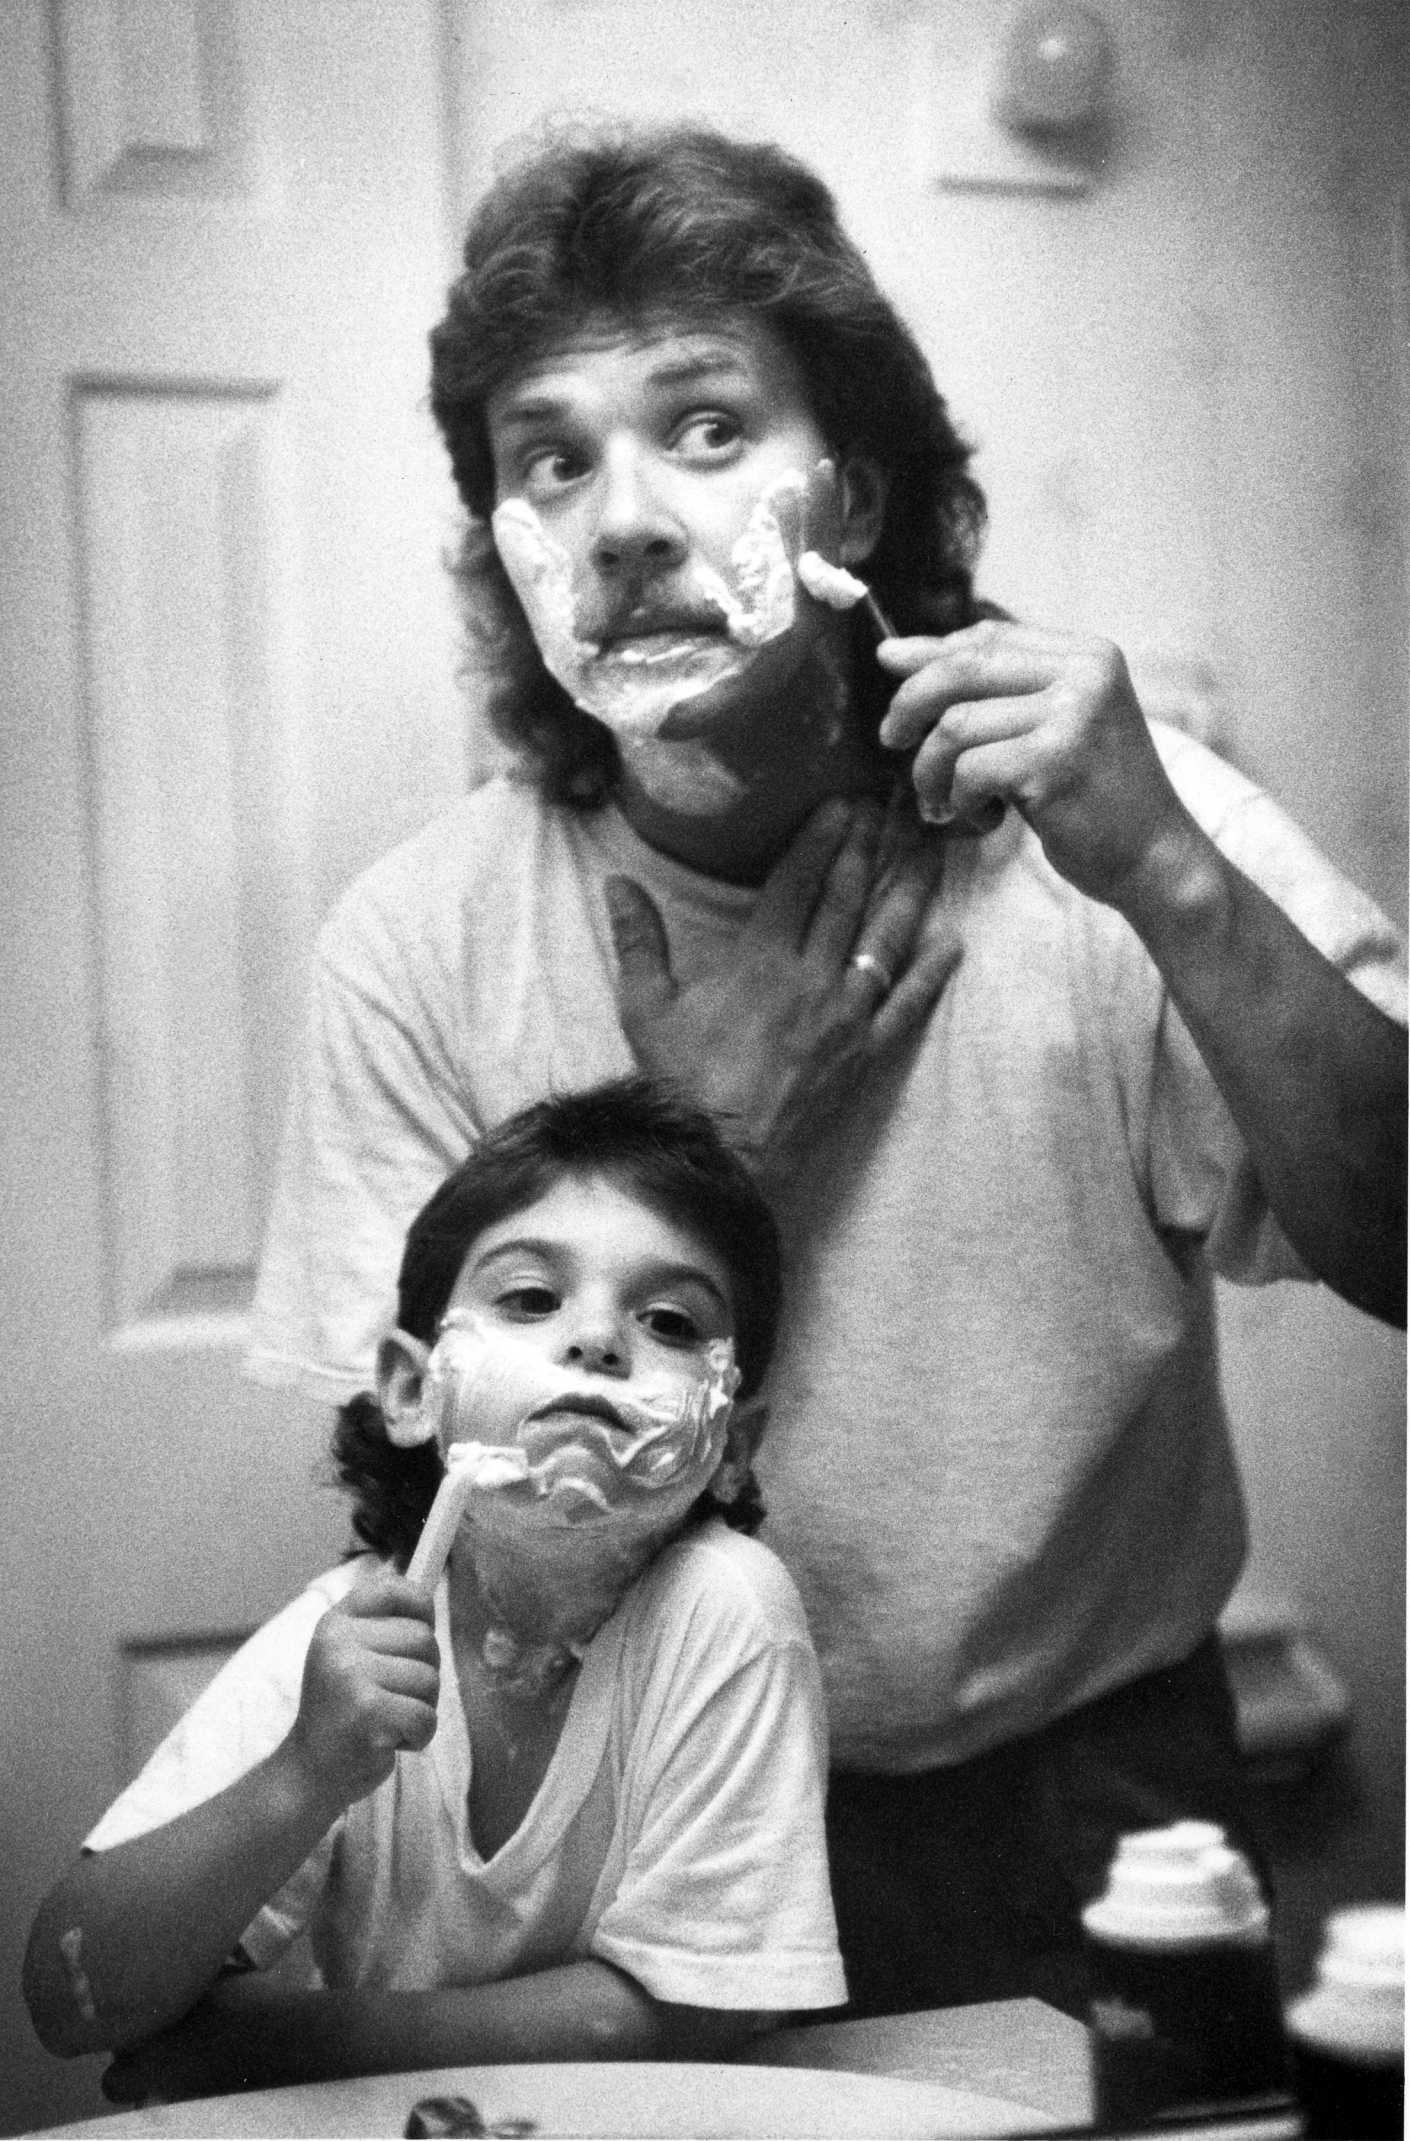 A morning shave for father and son. 1995